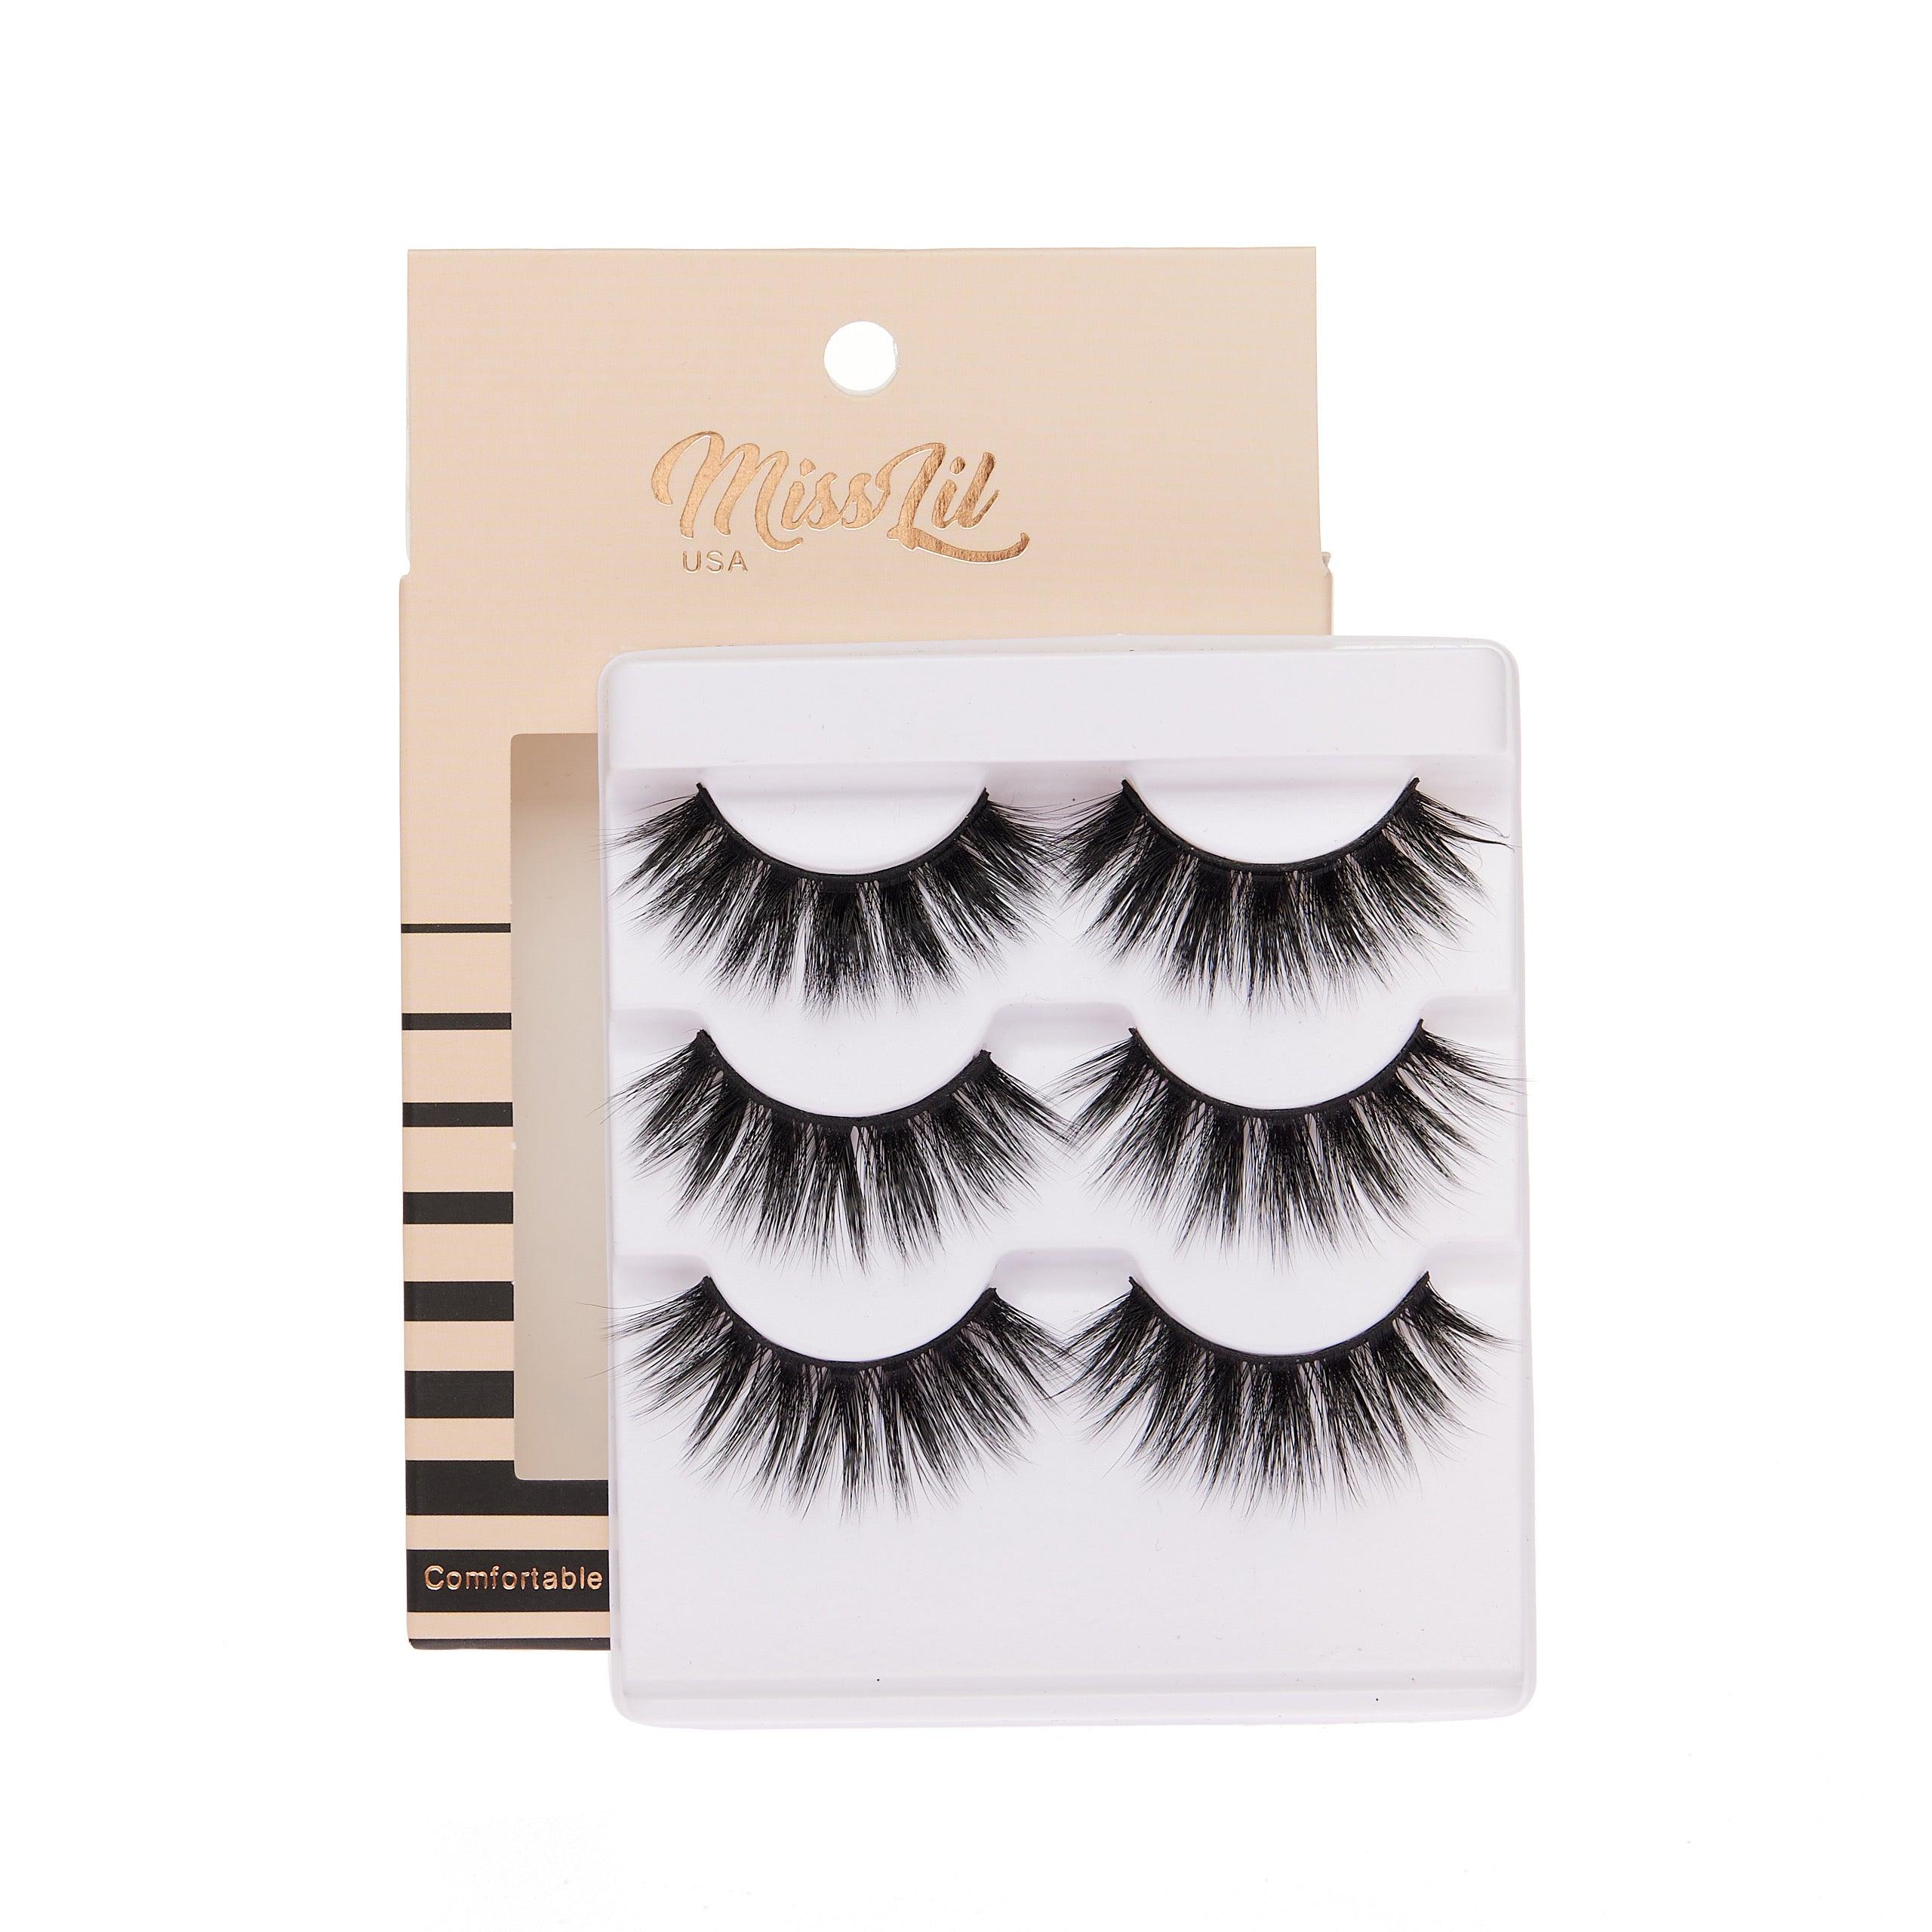 3-Pair Faux 9D Mink Eyelashes - Luxury Collection #15 - Pack of 3 - Miss Lil USA